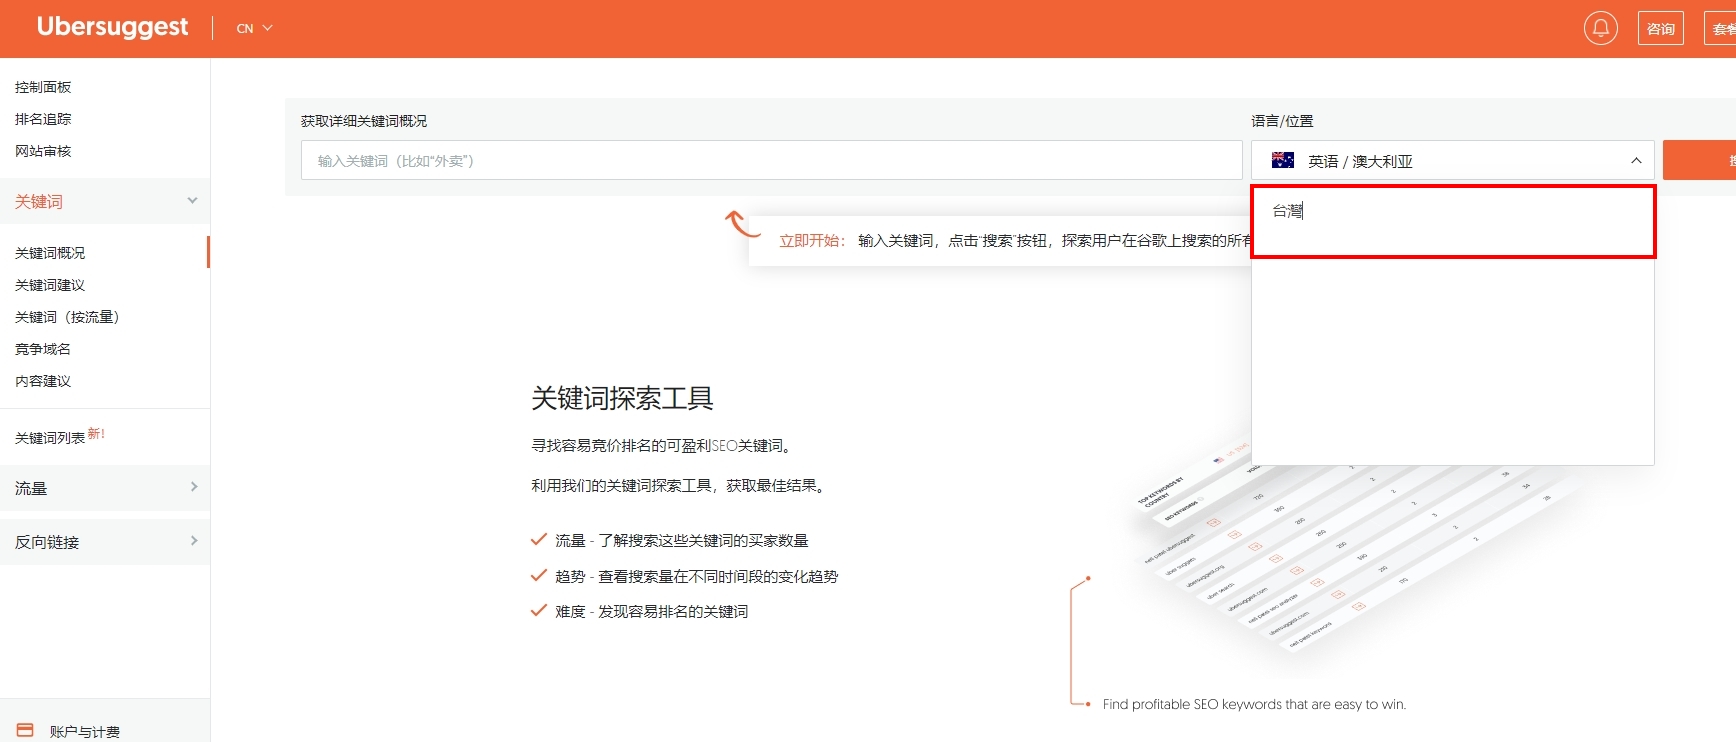 ubersuggest-keywords-tool-no-chinese-area-service